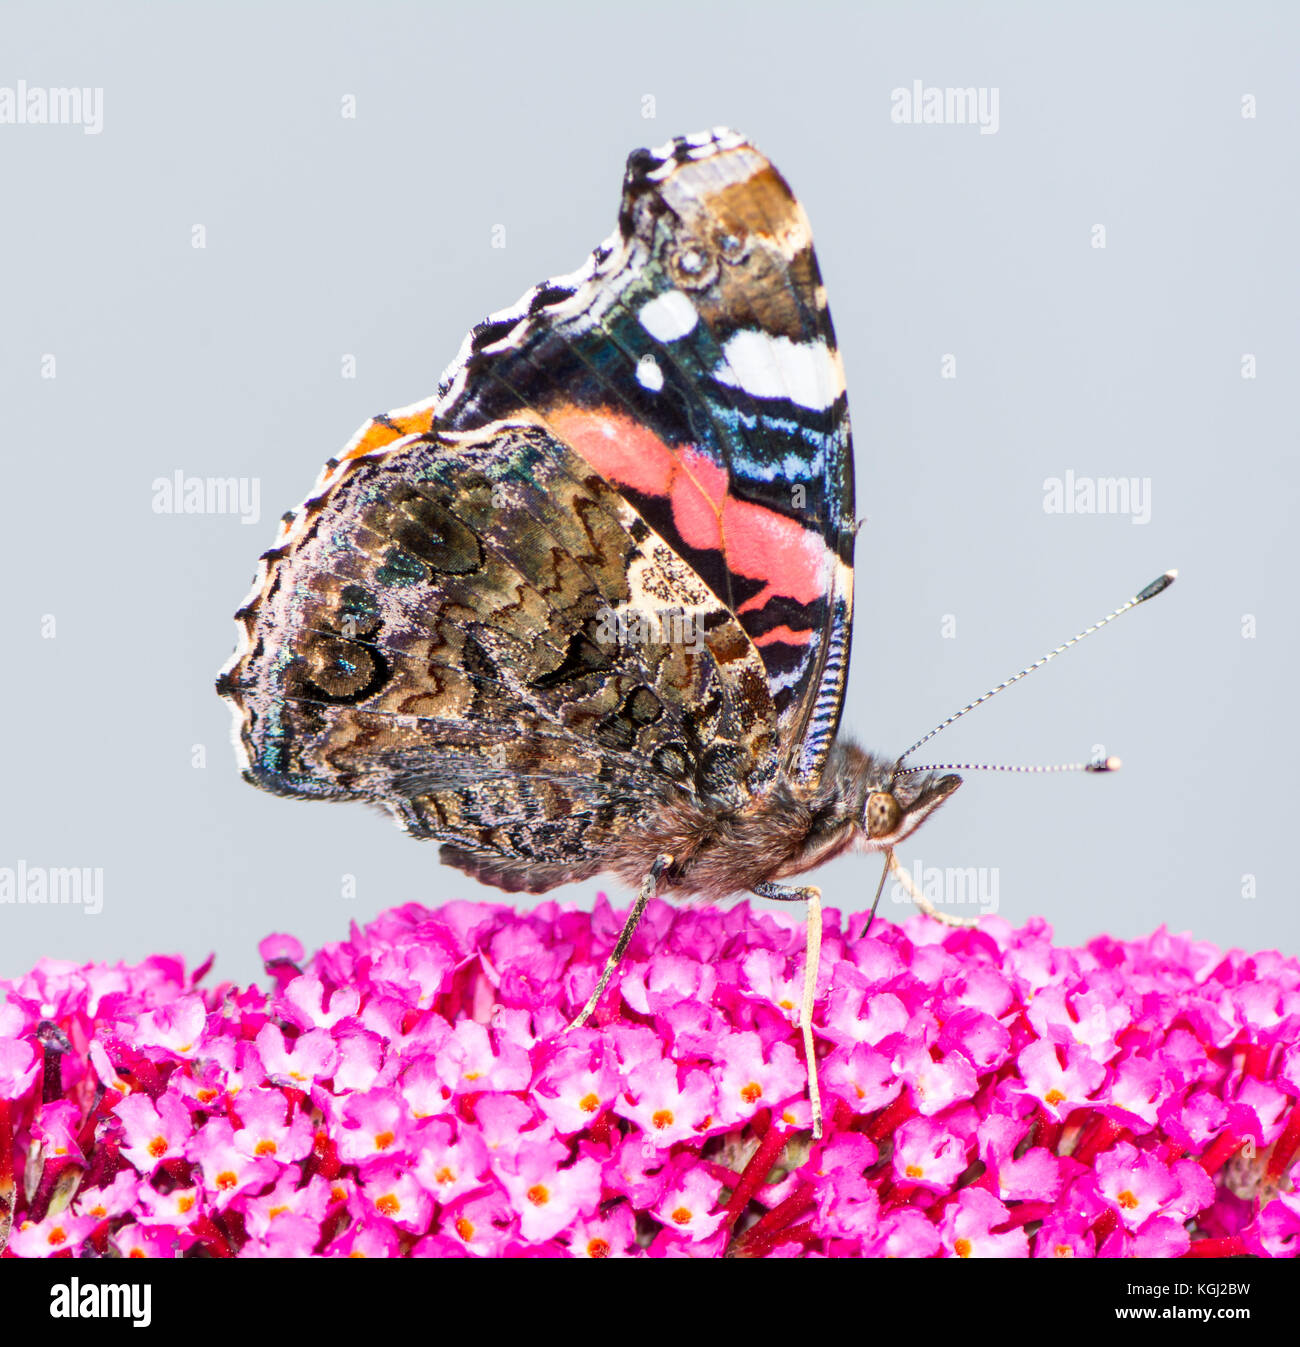 Macro of a painted laidy butterfly collecting nectar at a budleja blossom Stock Photo